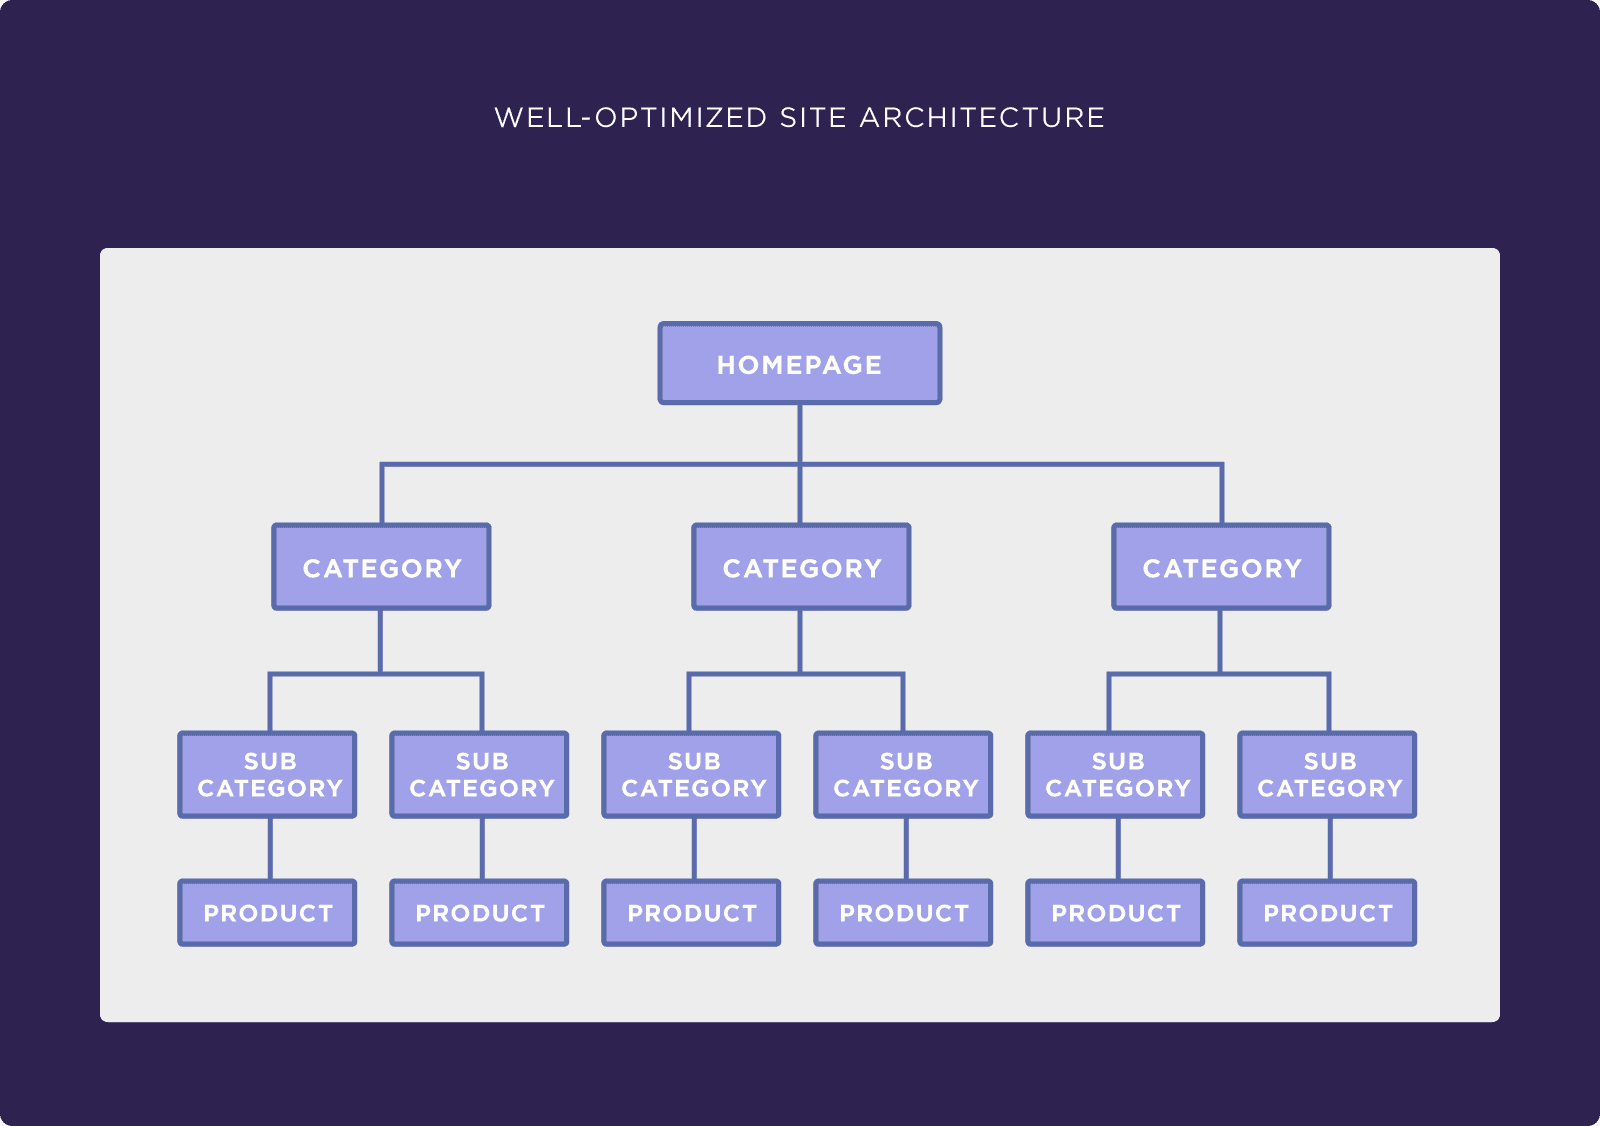 Well-optimized site architecture